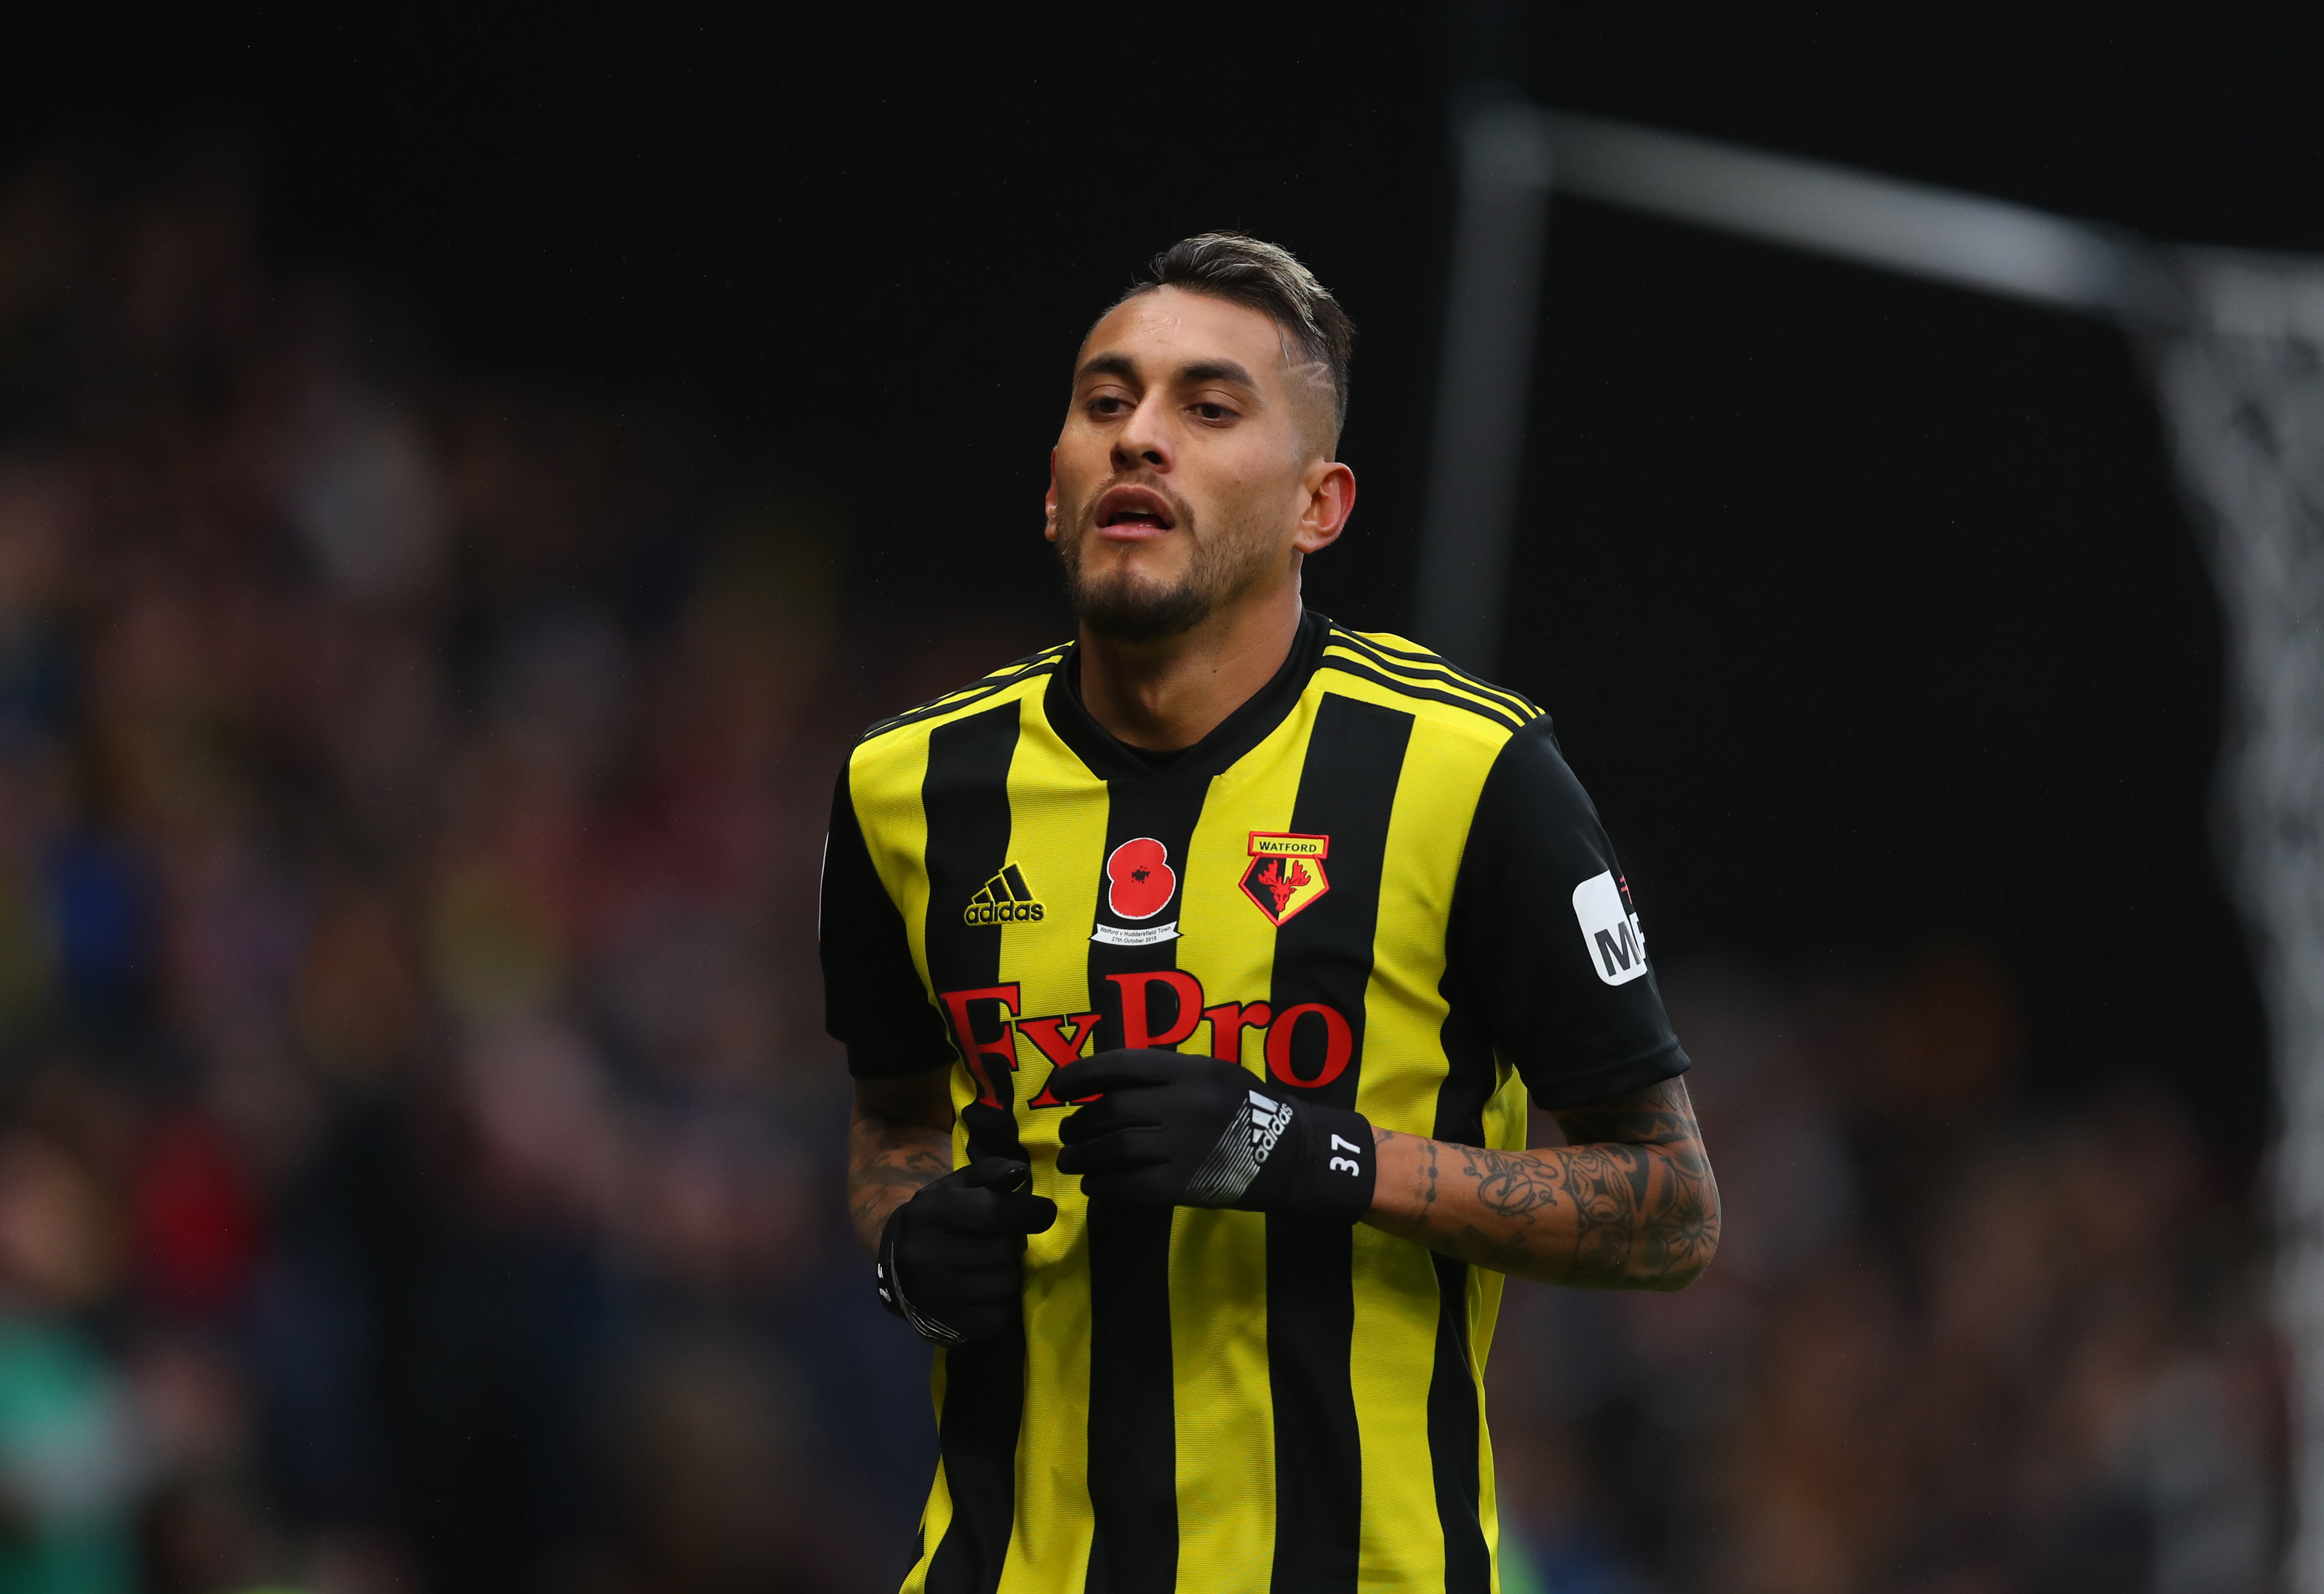 WATFORD, ENGLAND - OCTOBER 27: Roberto Pereyra of Watford during the Premier League match between Watford FC and Huddersfield Town at Vicarage Road on October 27, 2018 in Watford, United Kingdom. (Photo by Catherine Ivill/Getty Images)